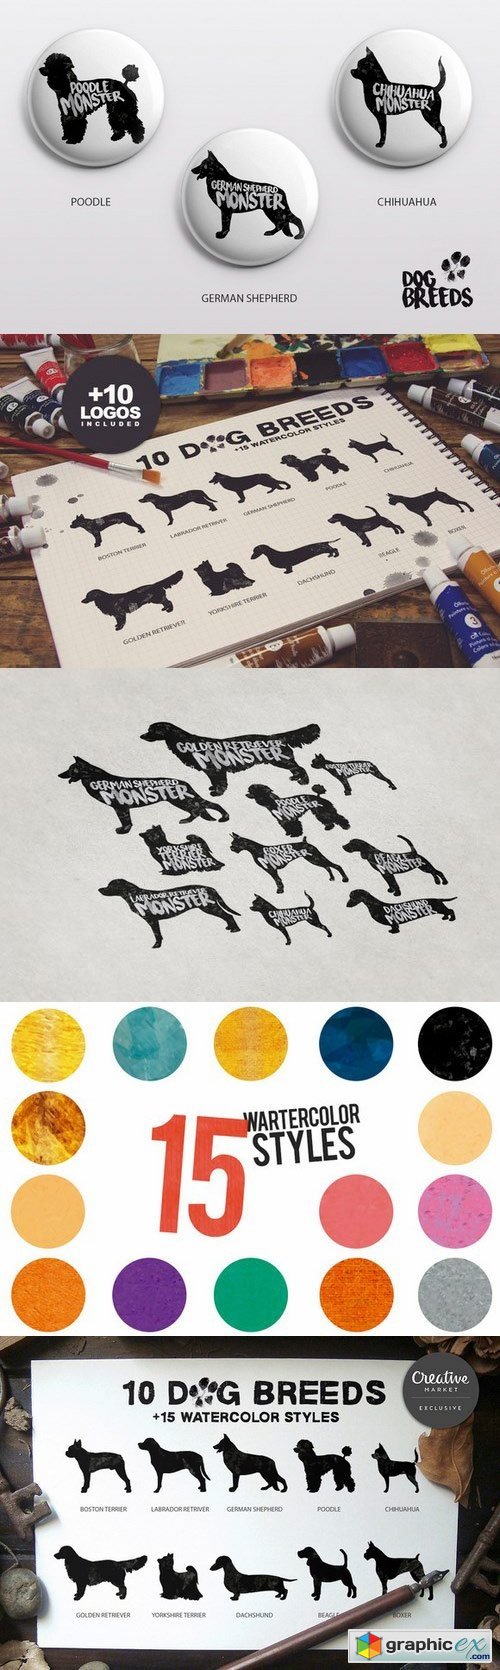 10 Dog Breeds + 15 Watercolor Styles